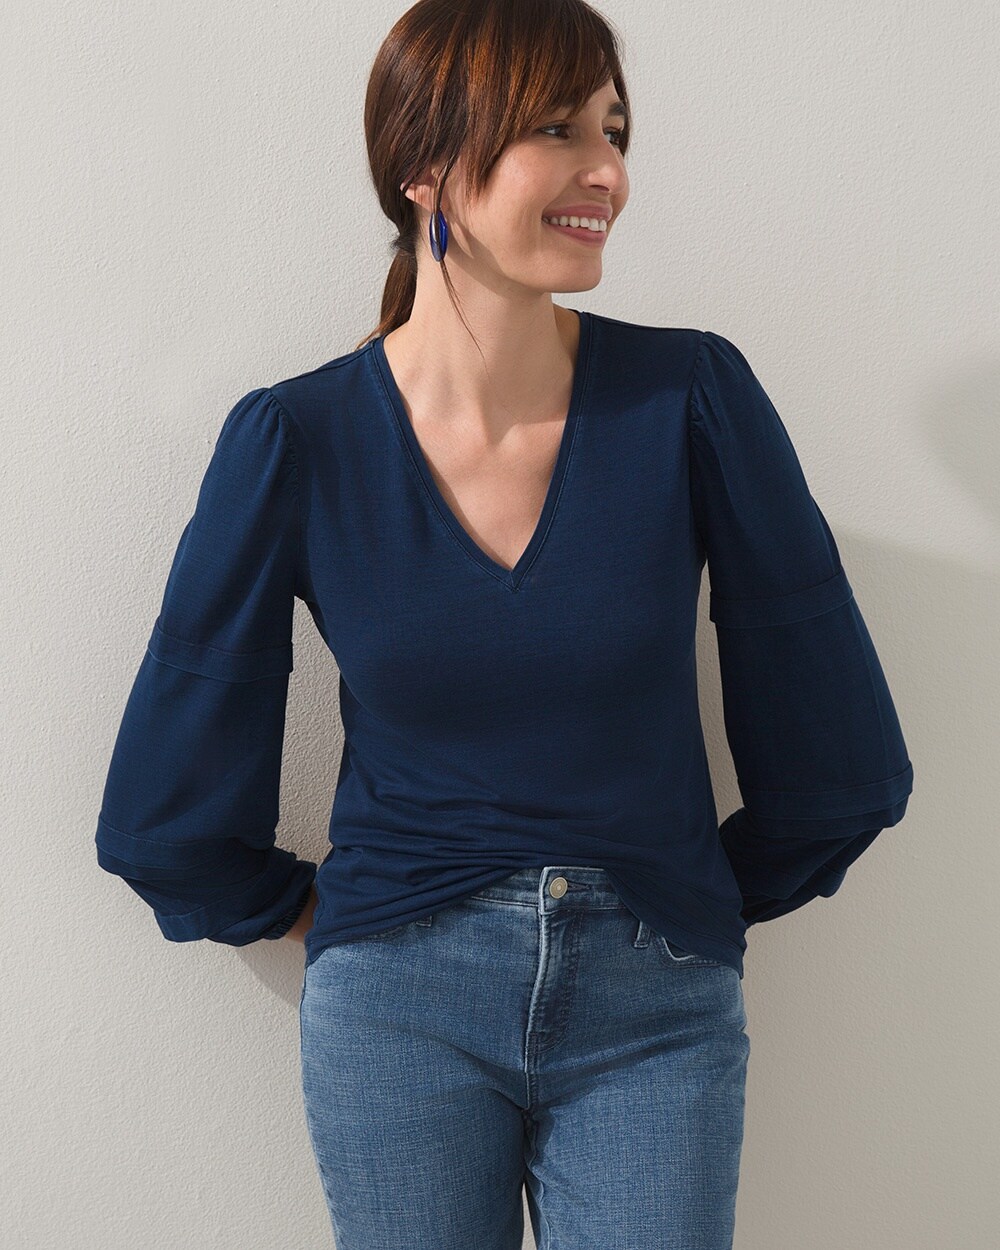 Chambray Sleeve V-neck Top video preview image, click to start video